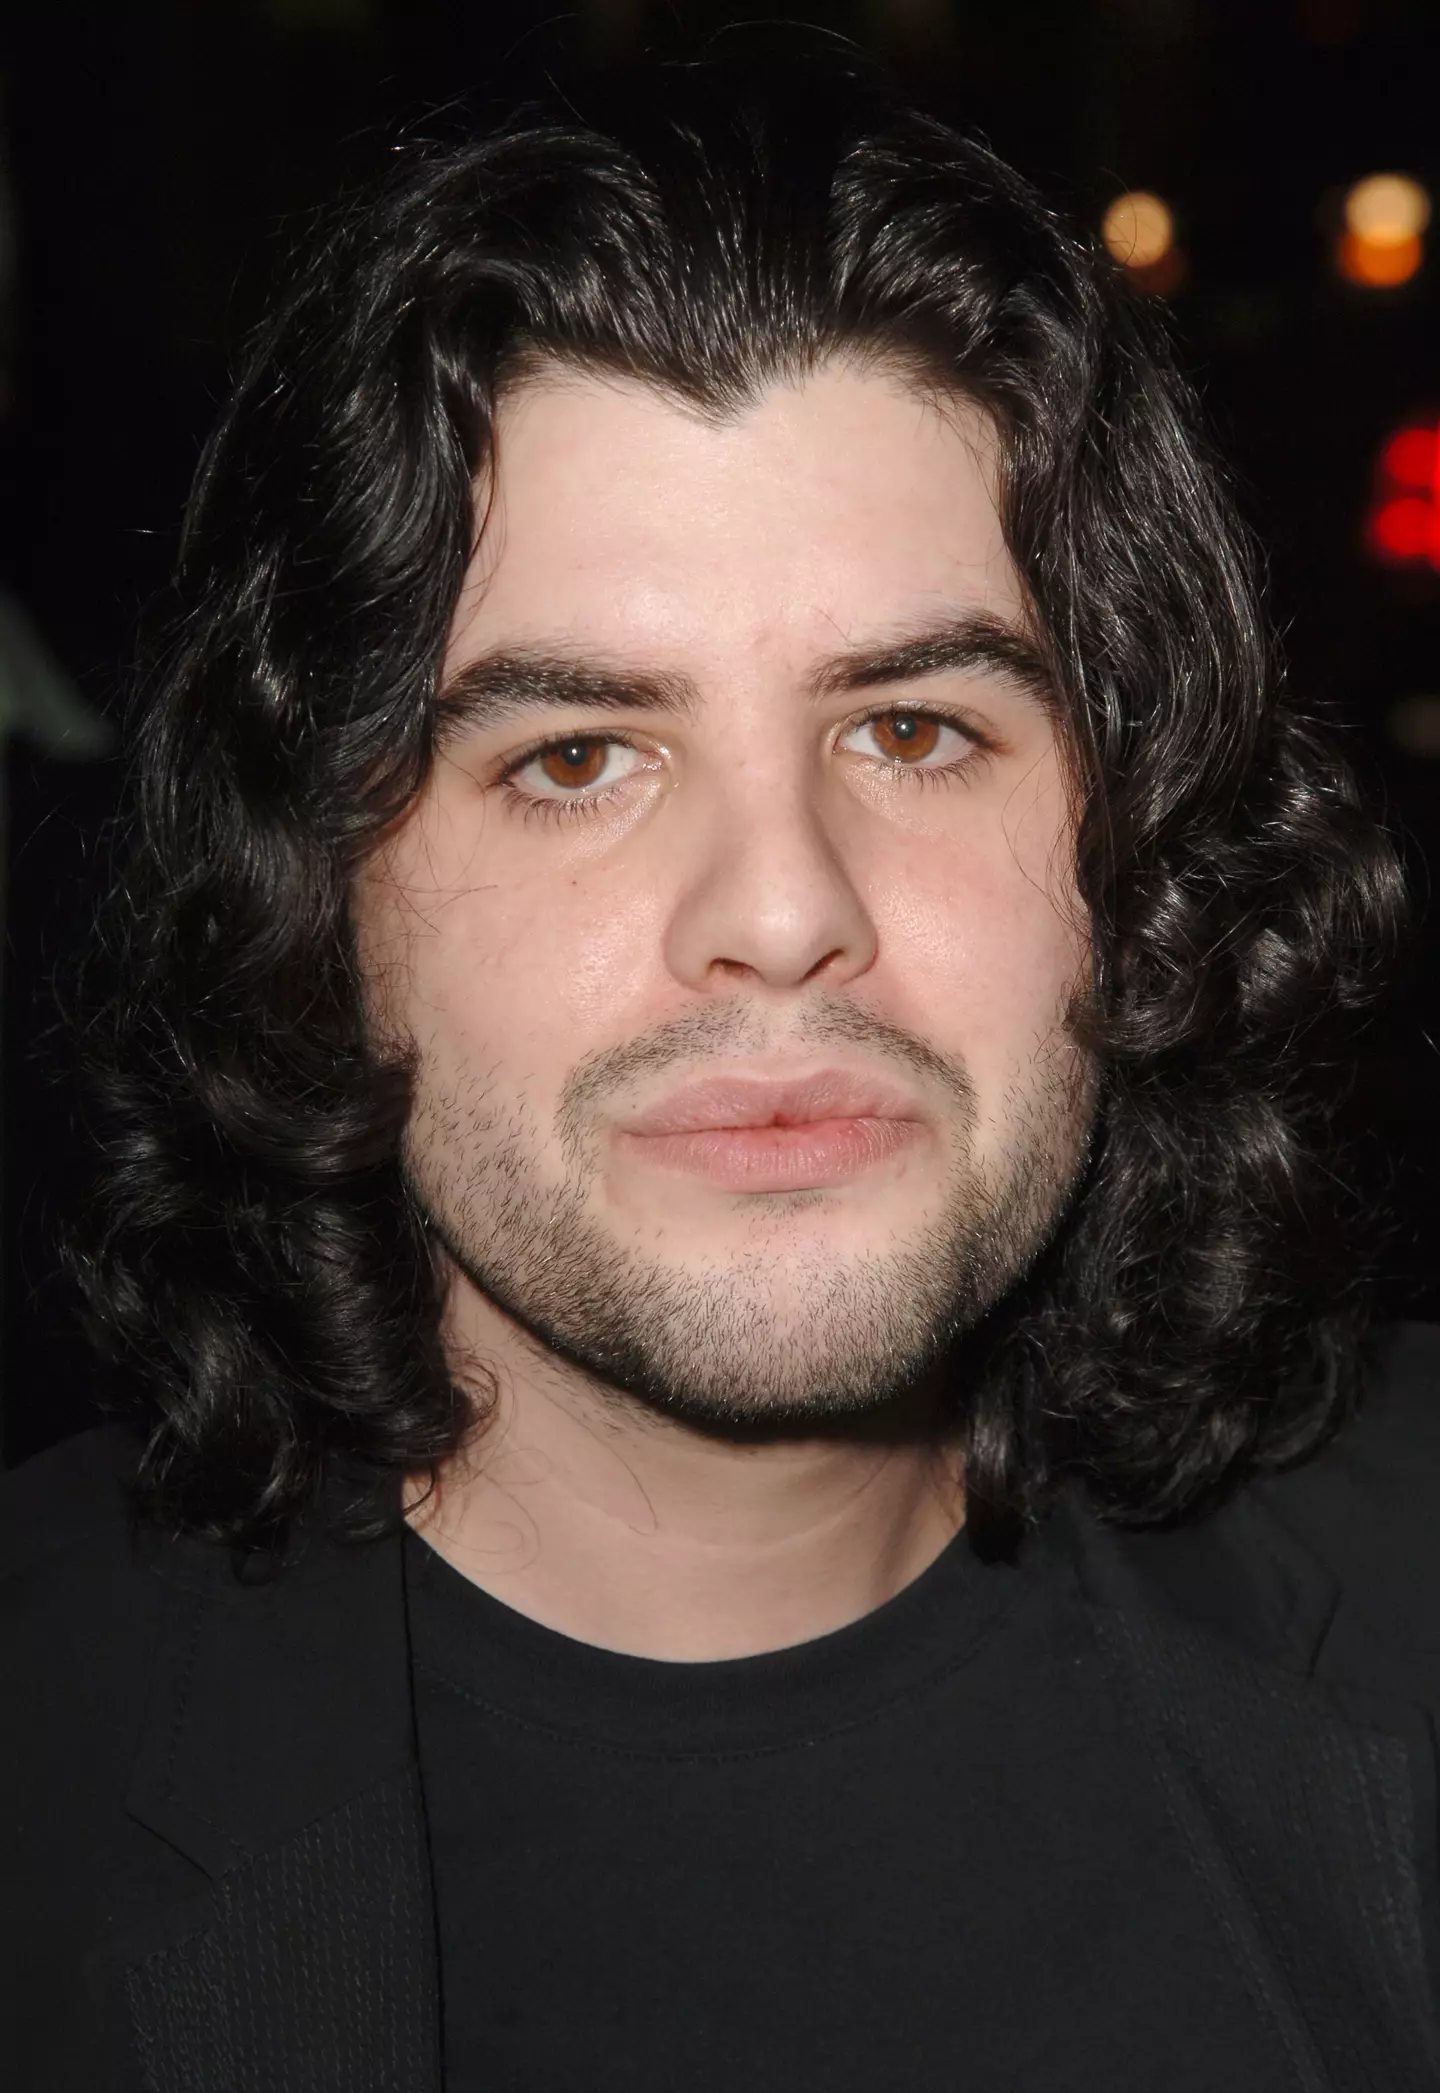 Sage Stallone died at the age of 36 in 2012.